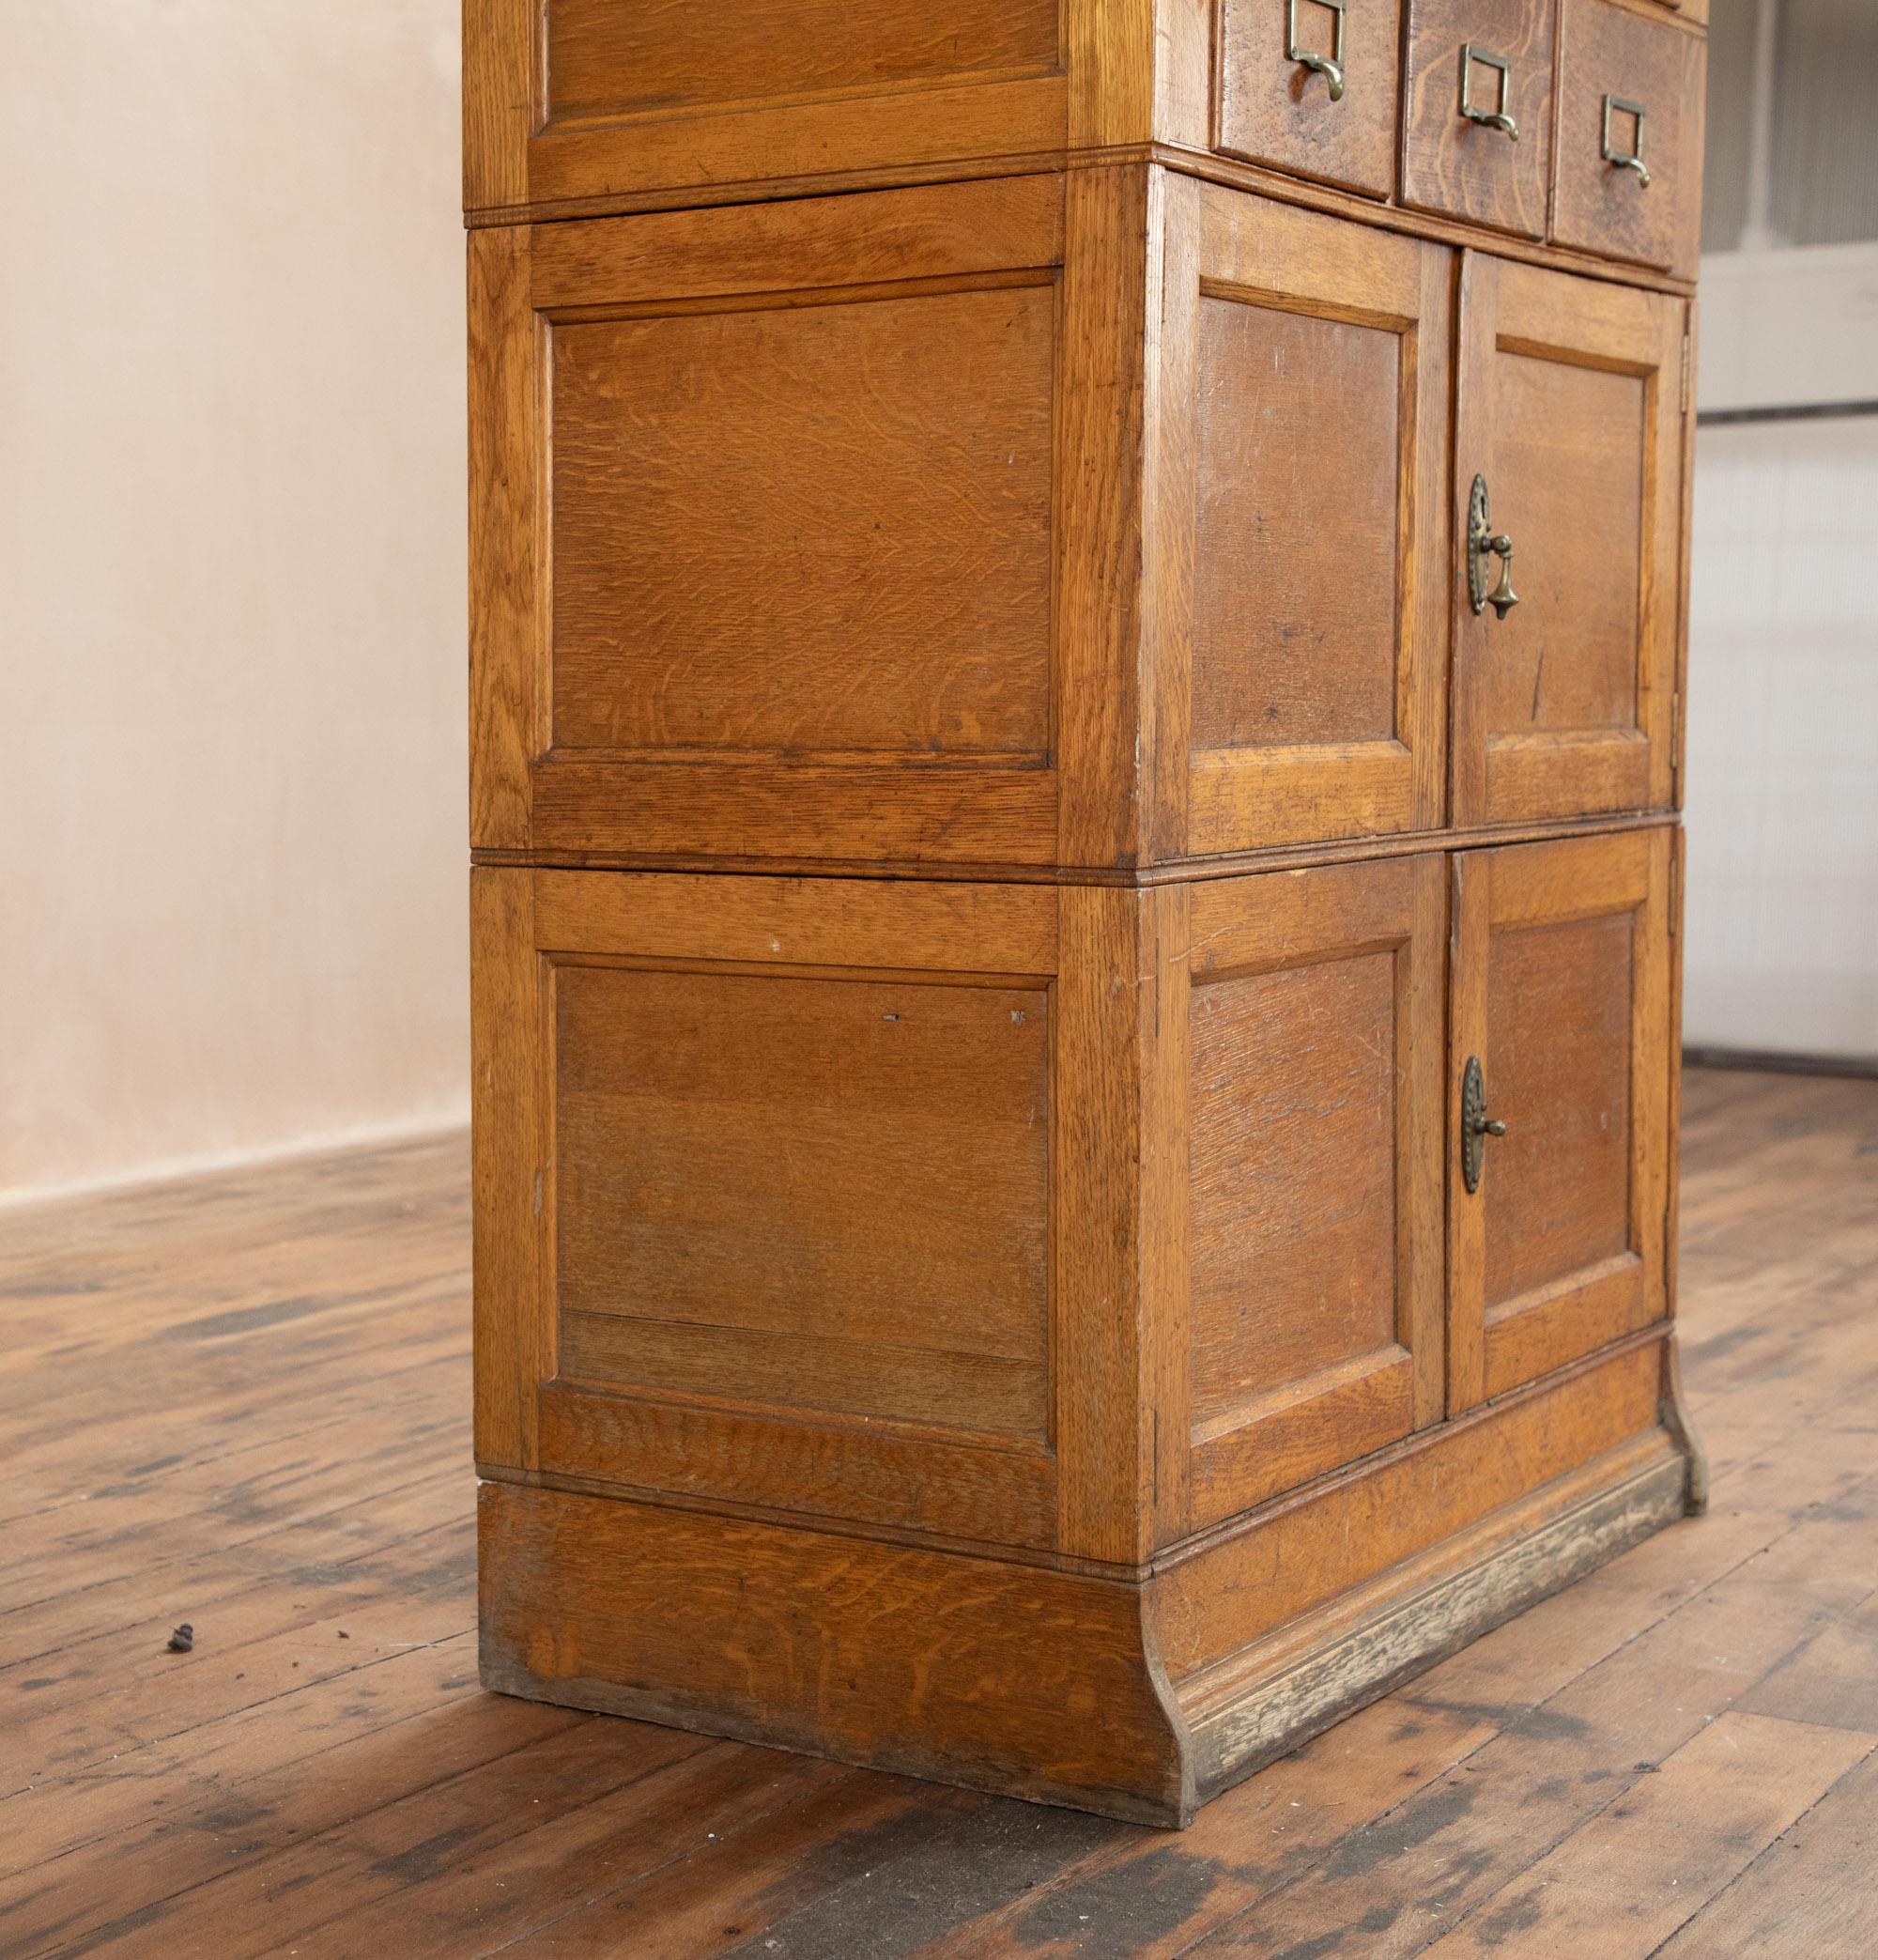 Vintage 1900's oak filling cabinet, haberdashery, apothecary drawers For Sale 2